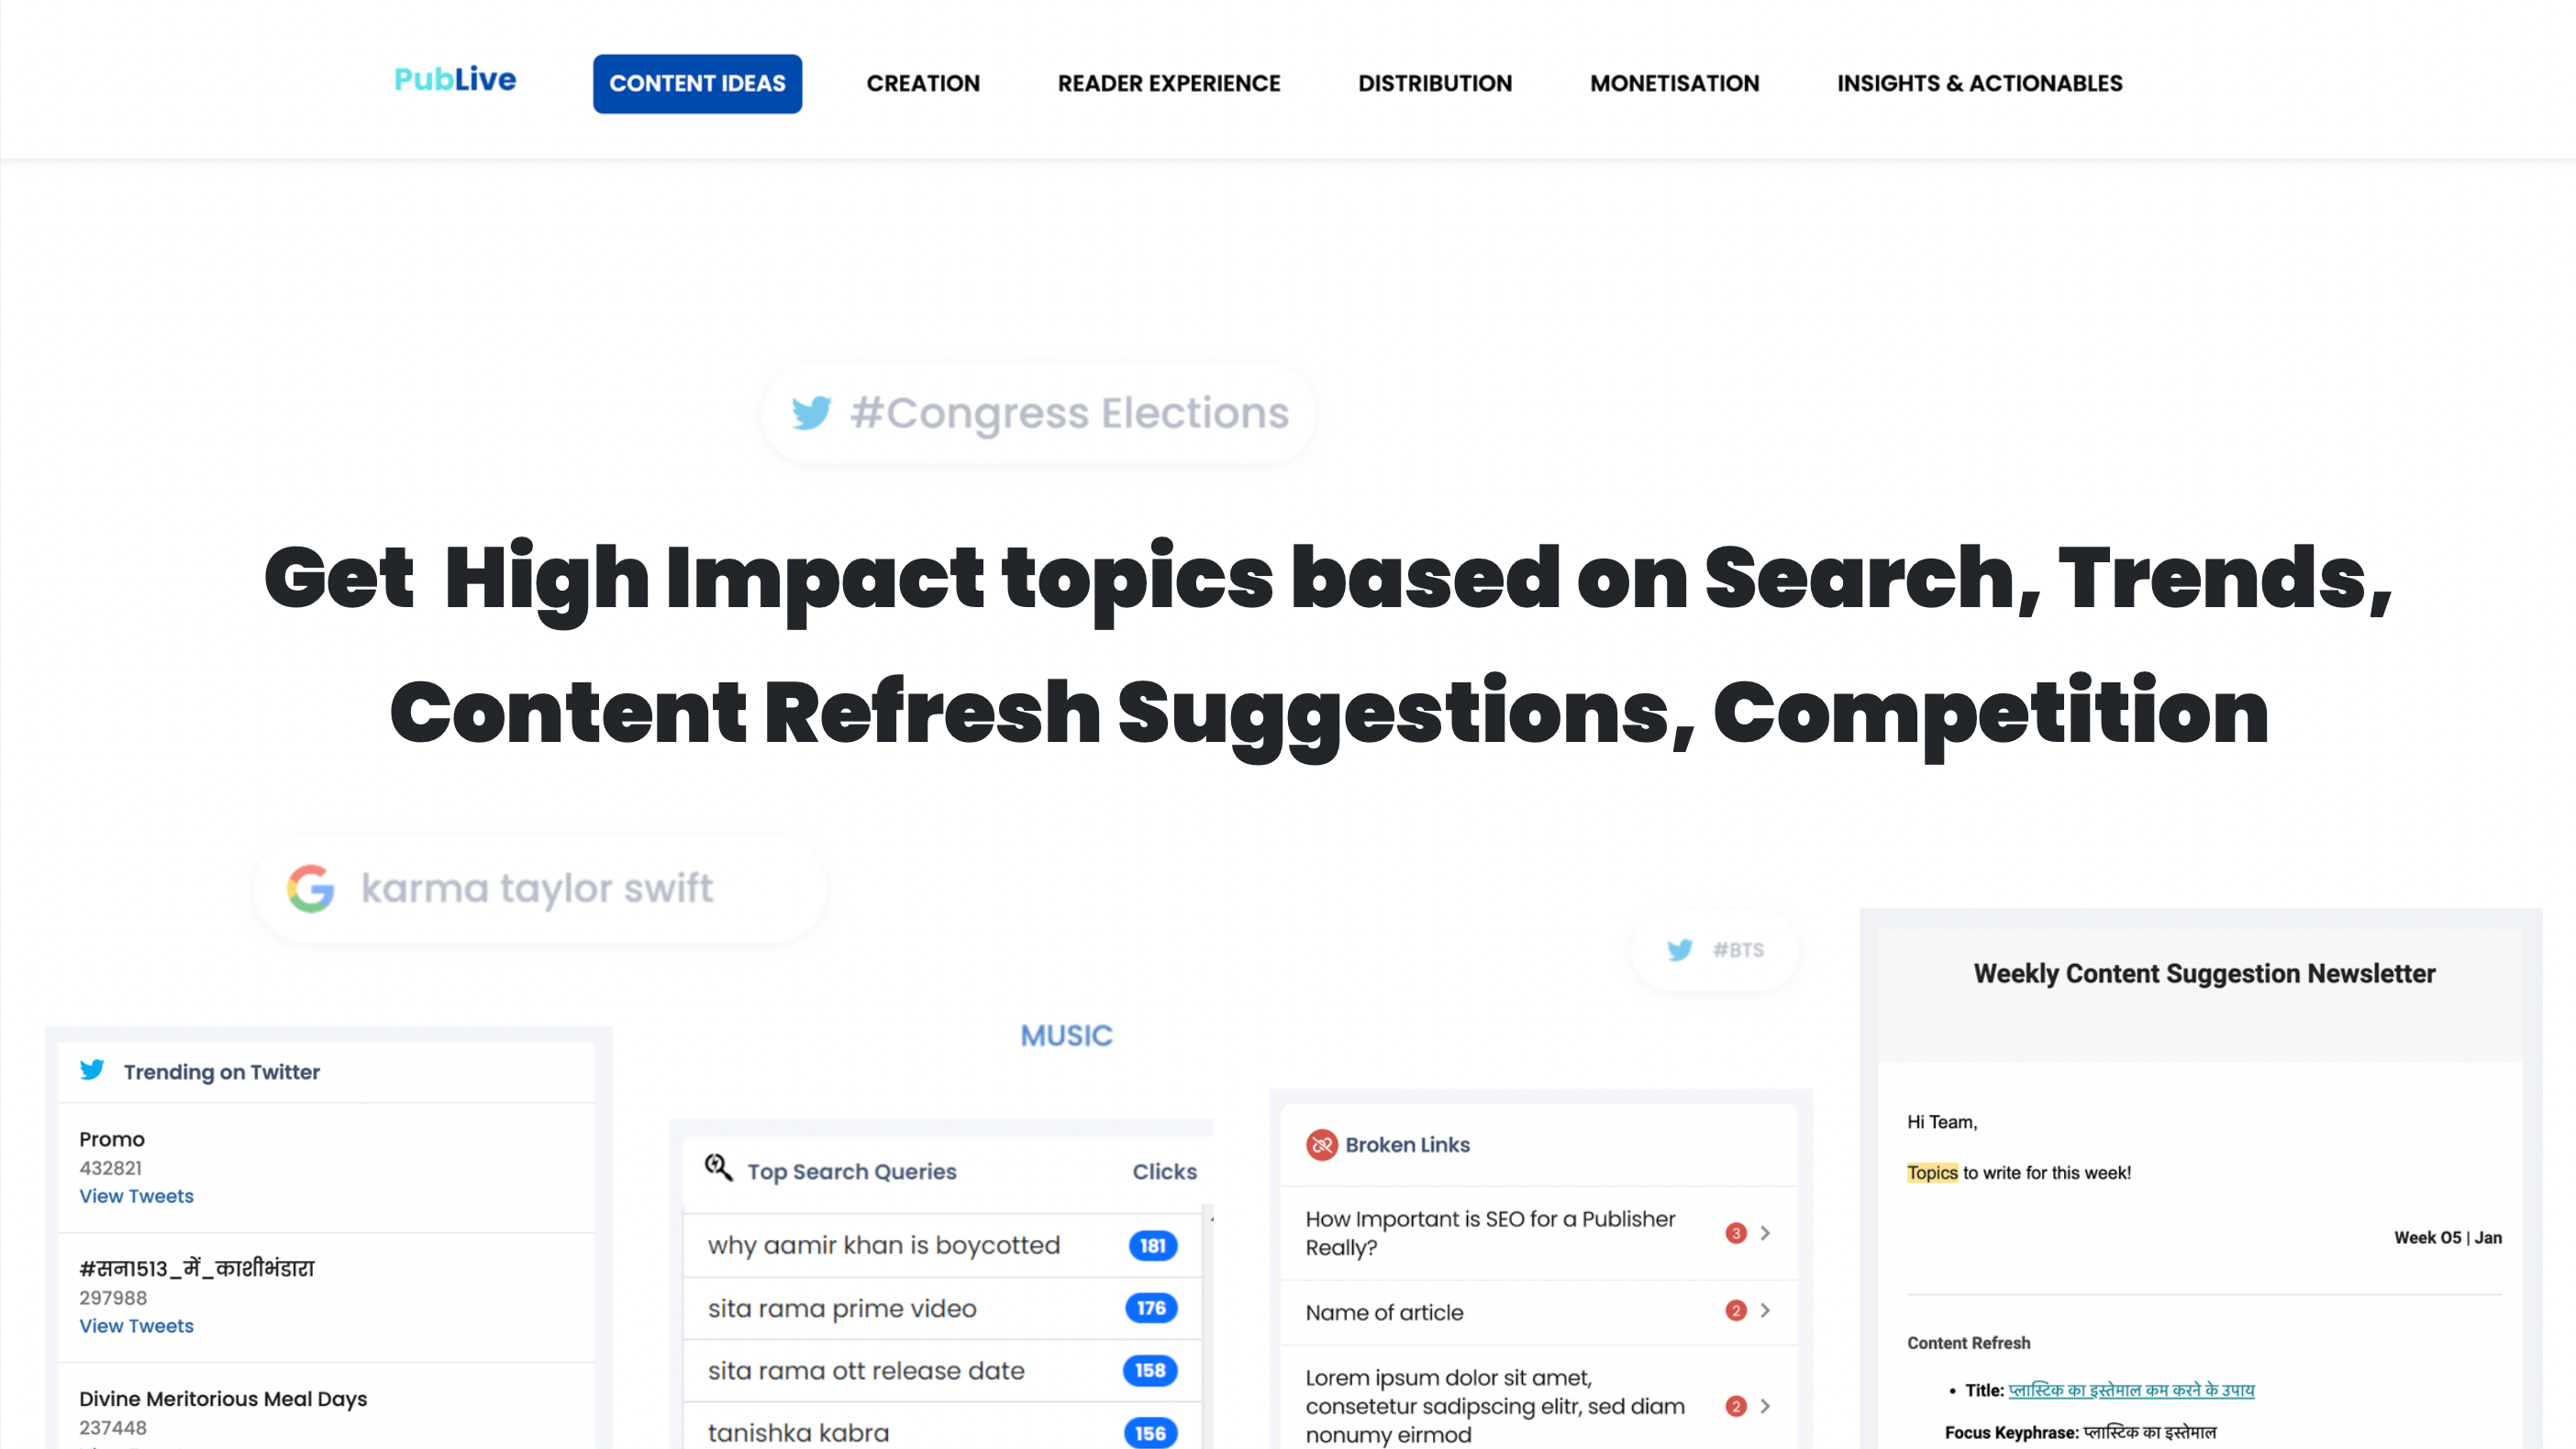 Get High Impact topics based on Search, Trends, Content Refresh Suggestions, Competition